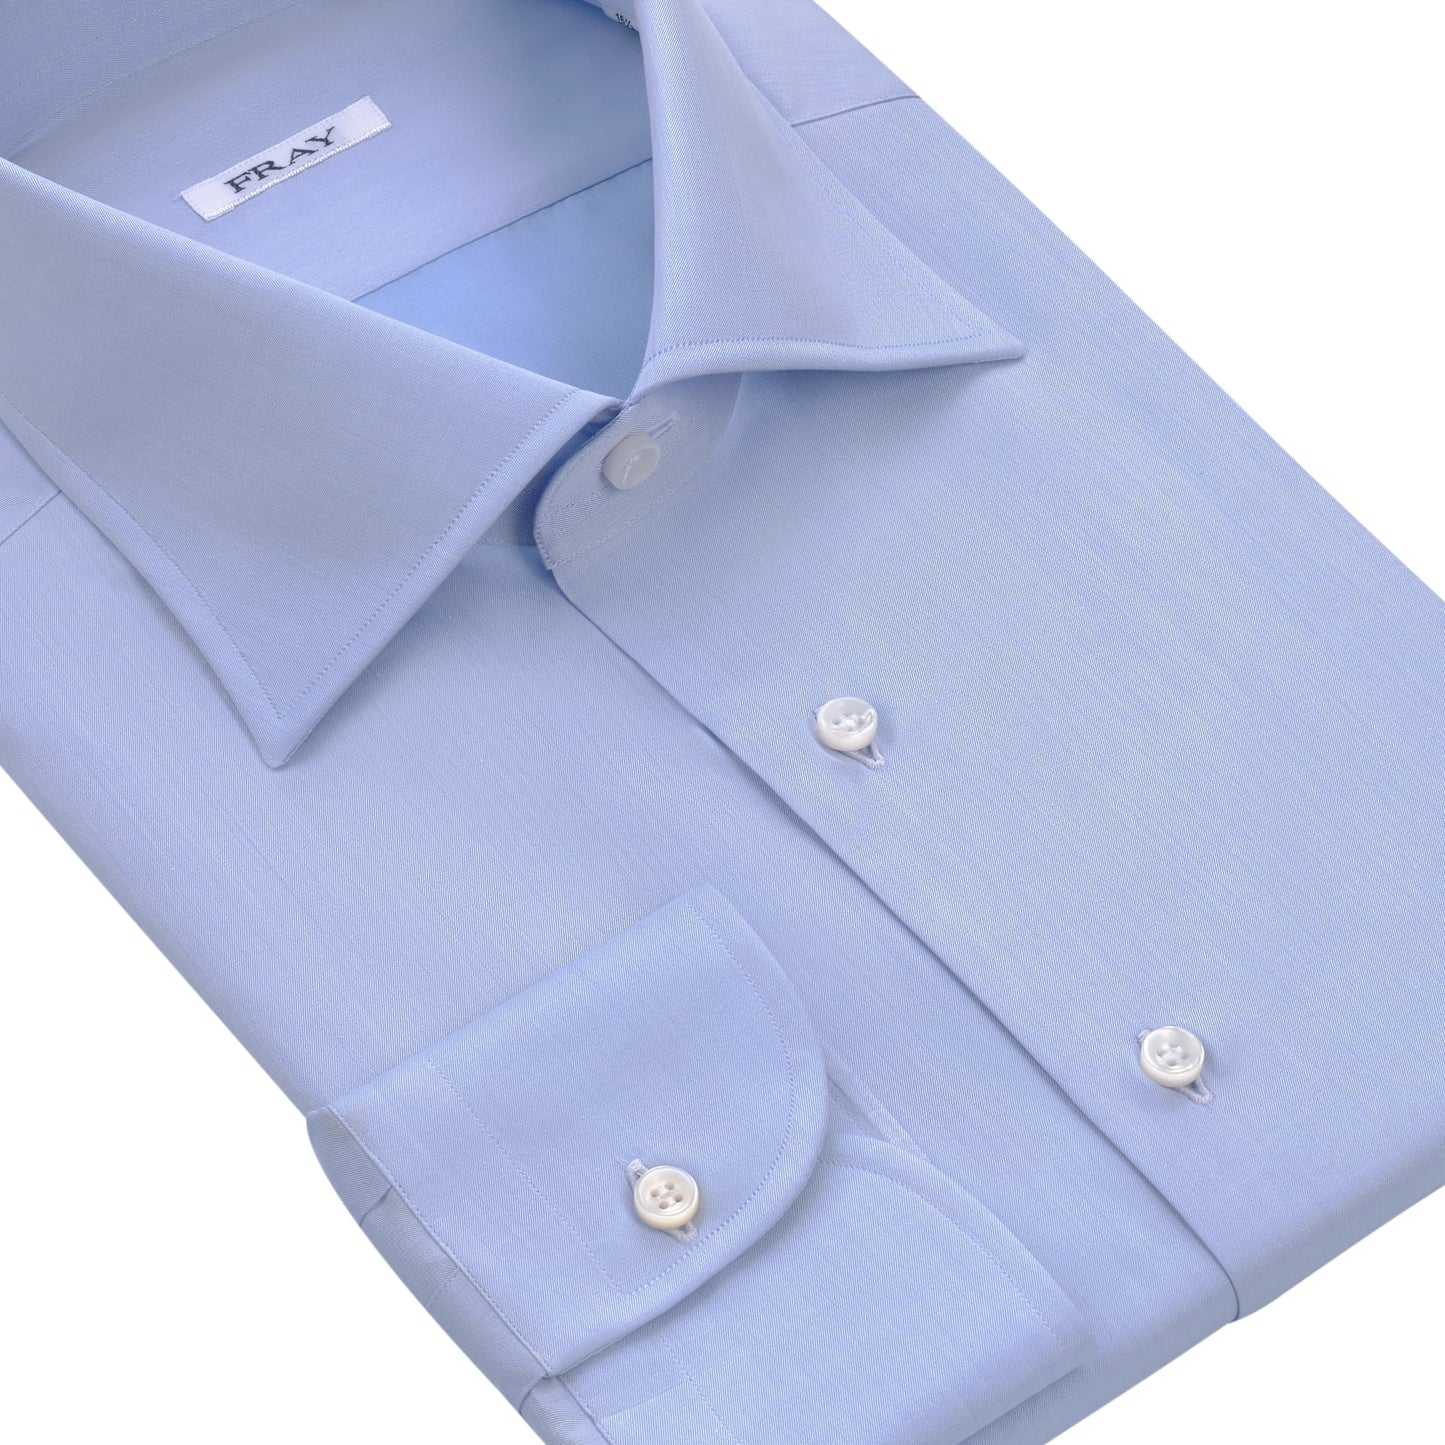 Fray Classic Cotton Shirt in Light Blue with Spread Collar - SARTALE